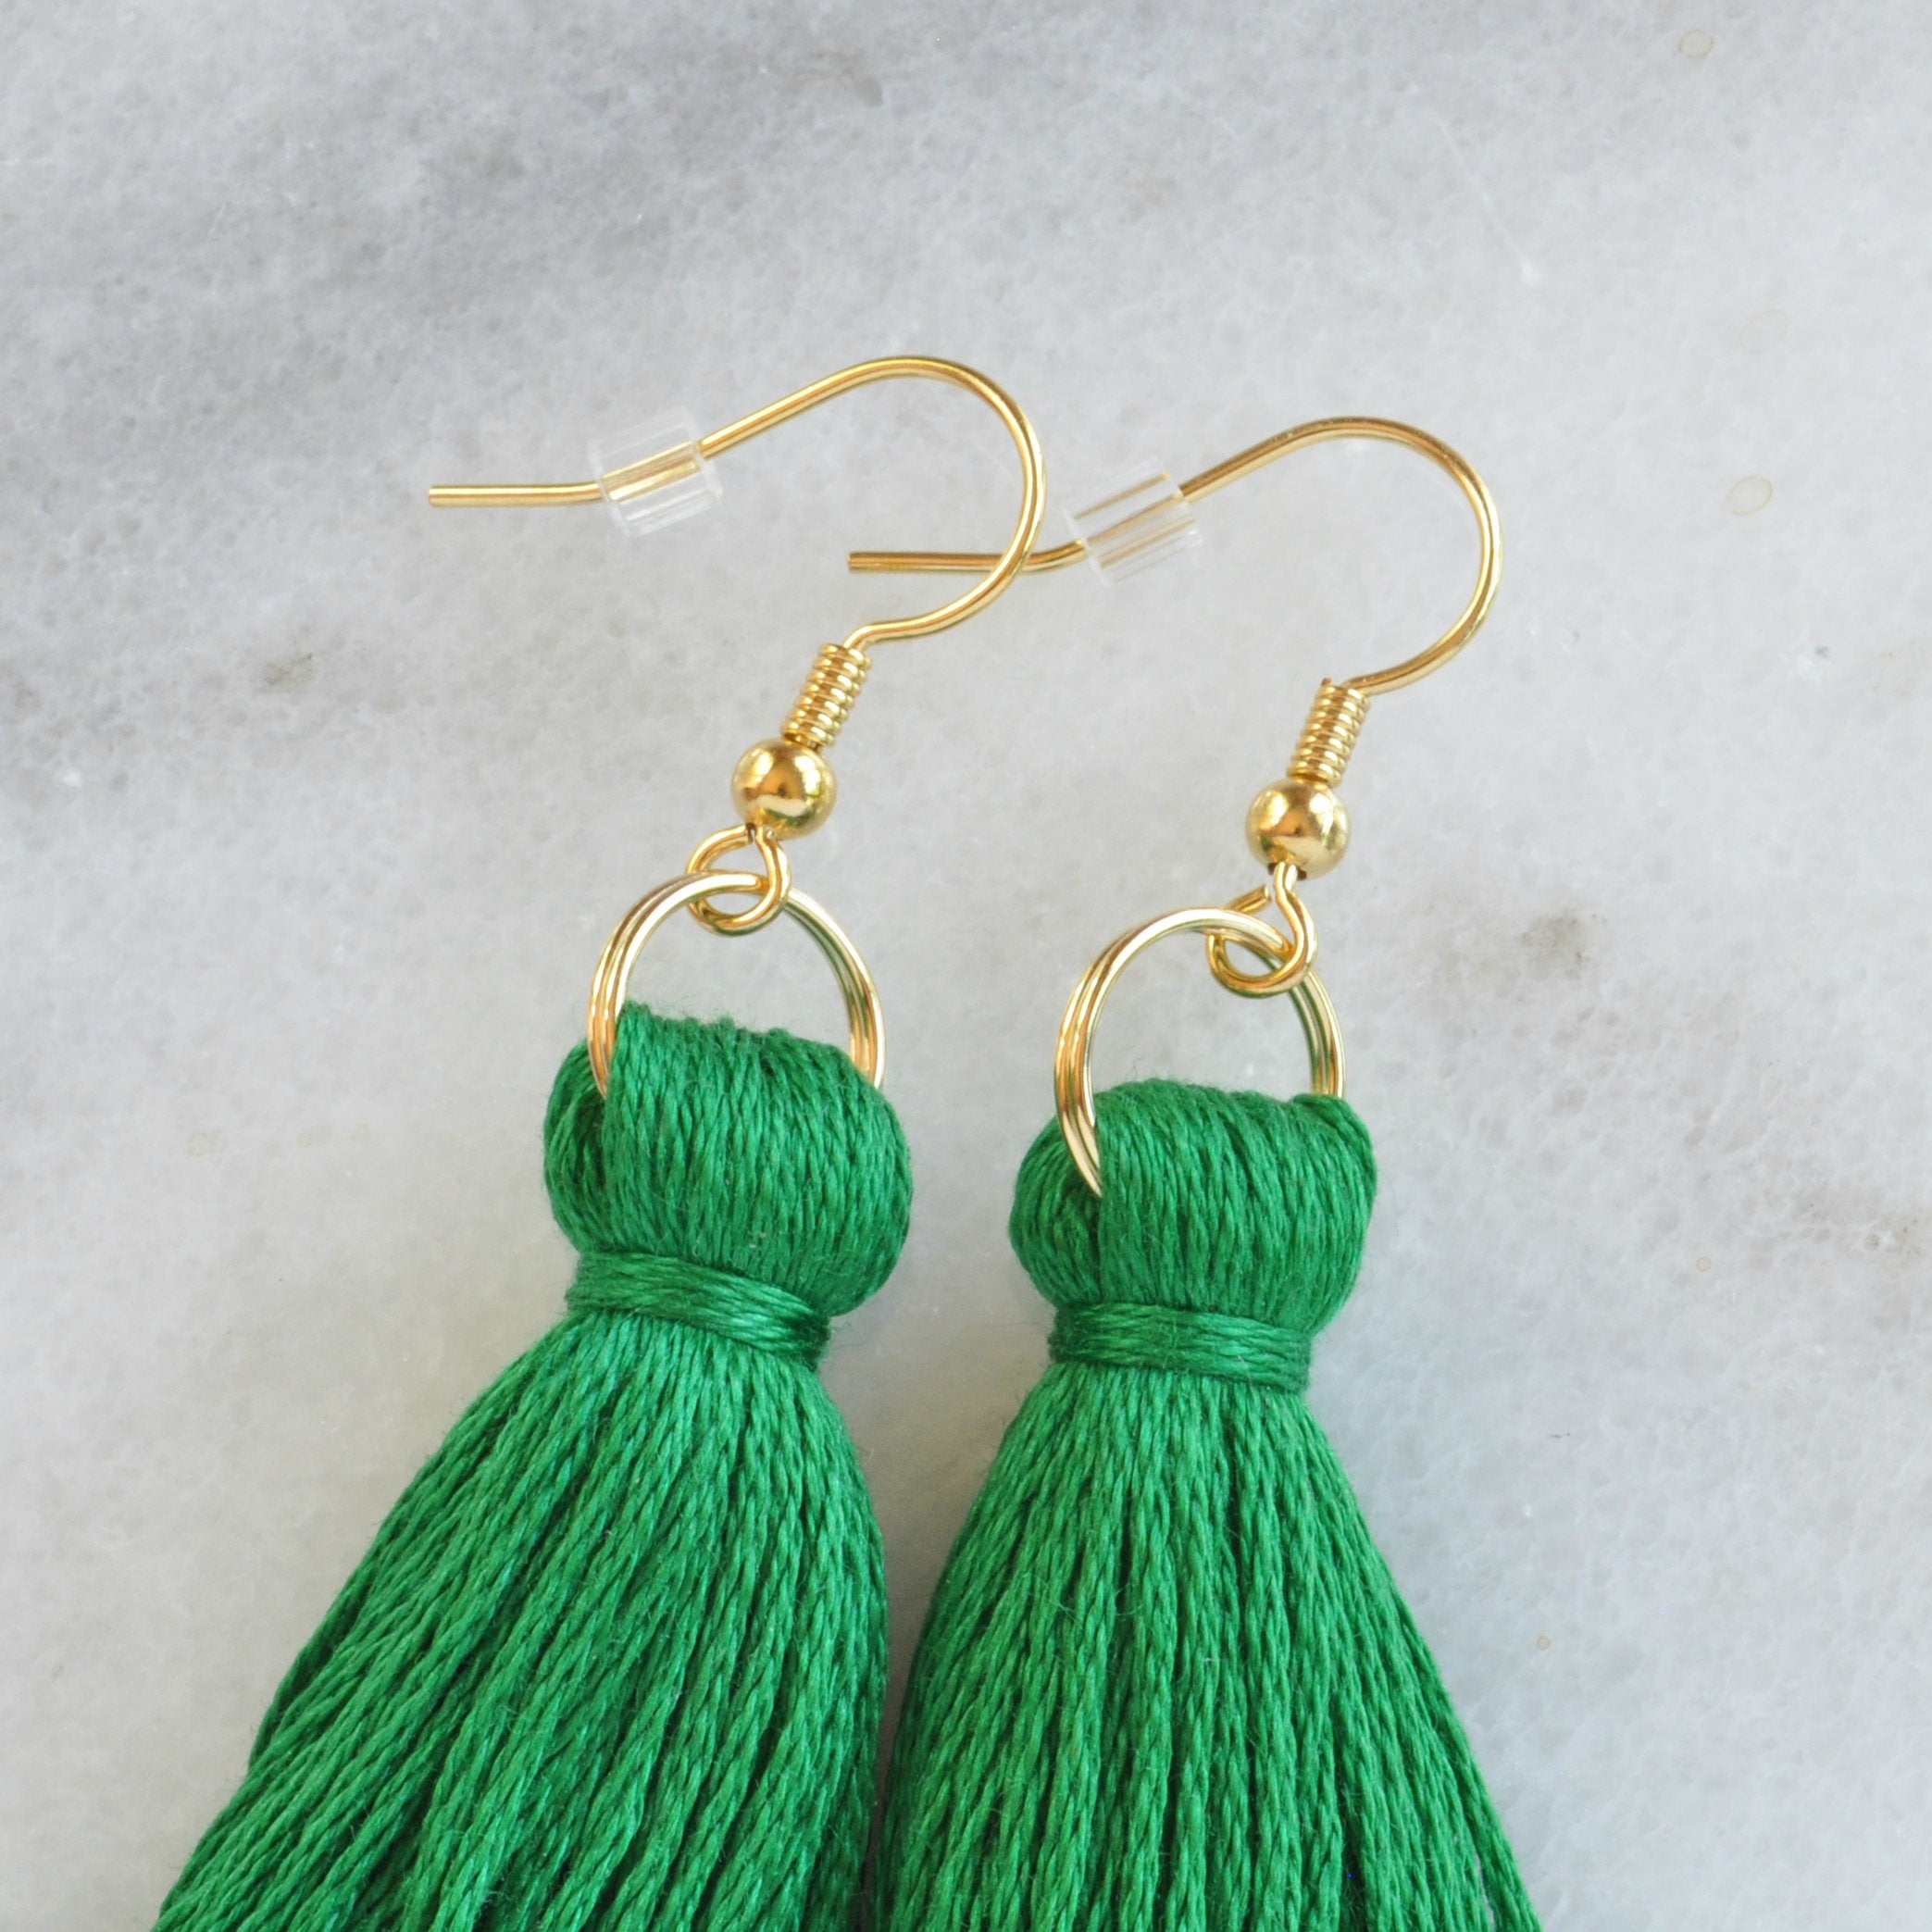 Close up of Emerald Green tassel earrings from Libby & Smee with a plastic earring backing